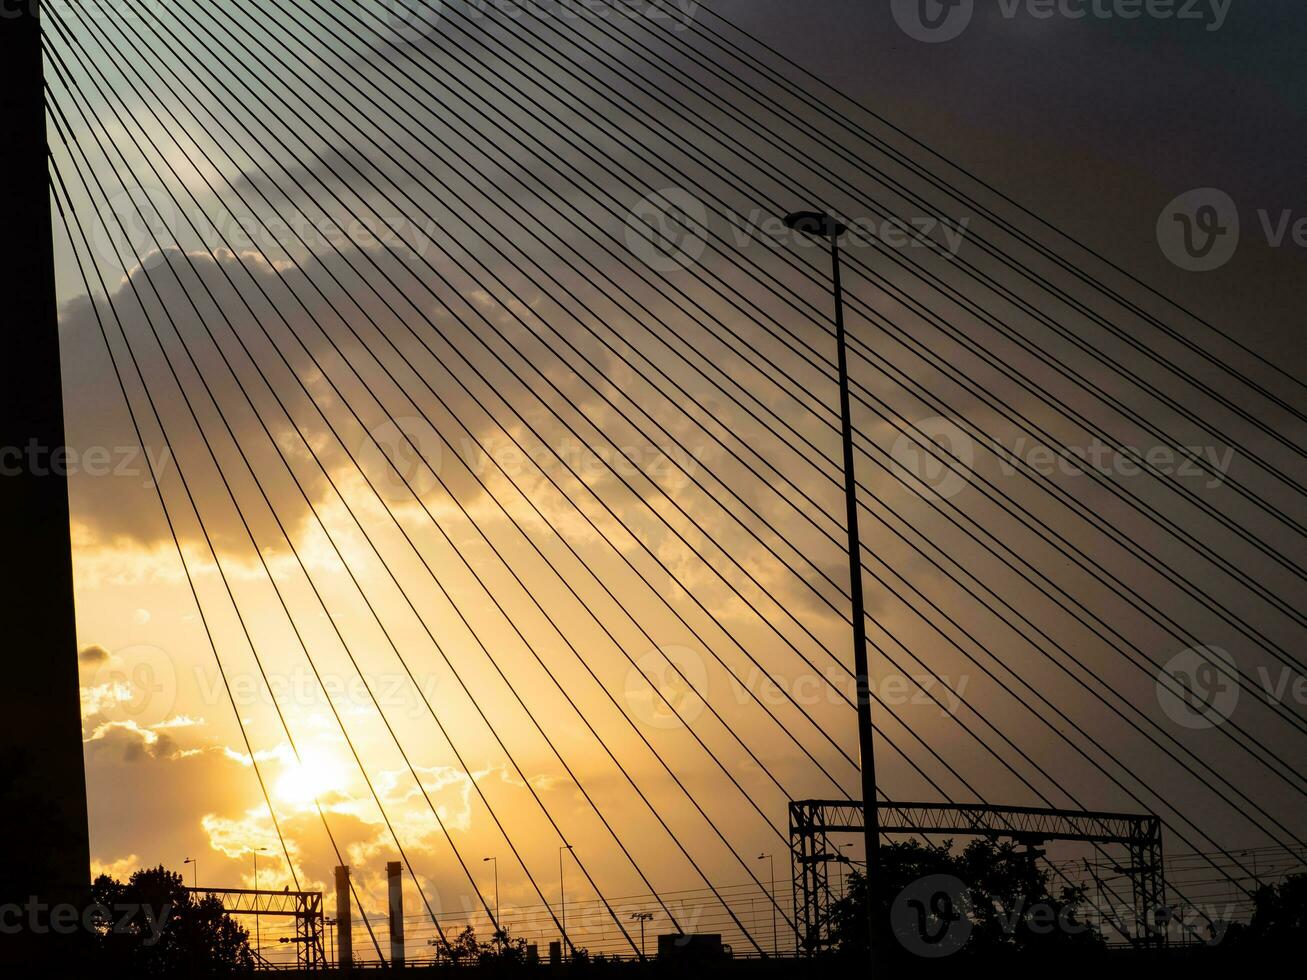 Sunset through the suspension cables with industrial chimneys in the background photo